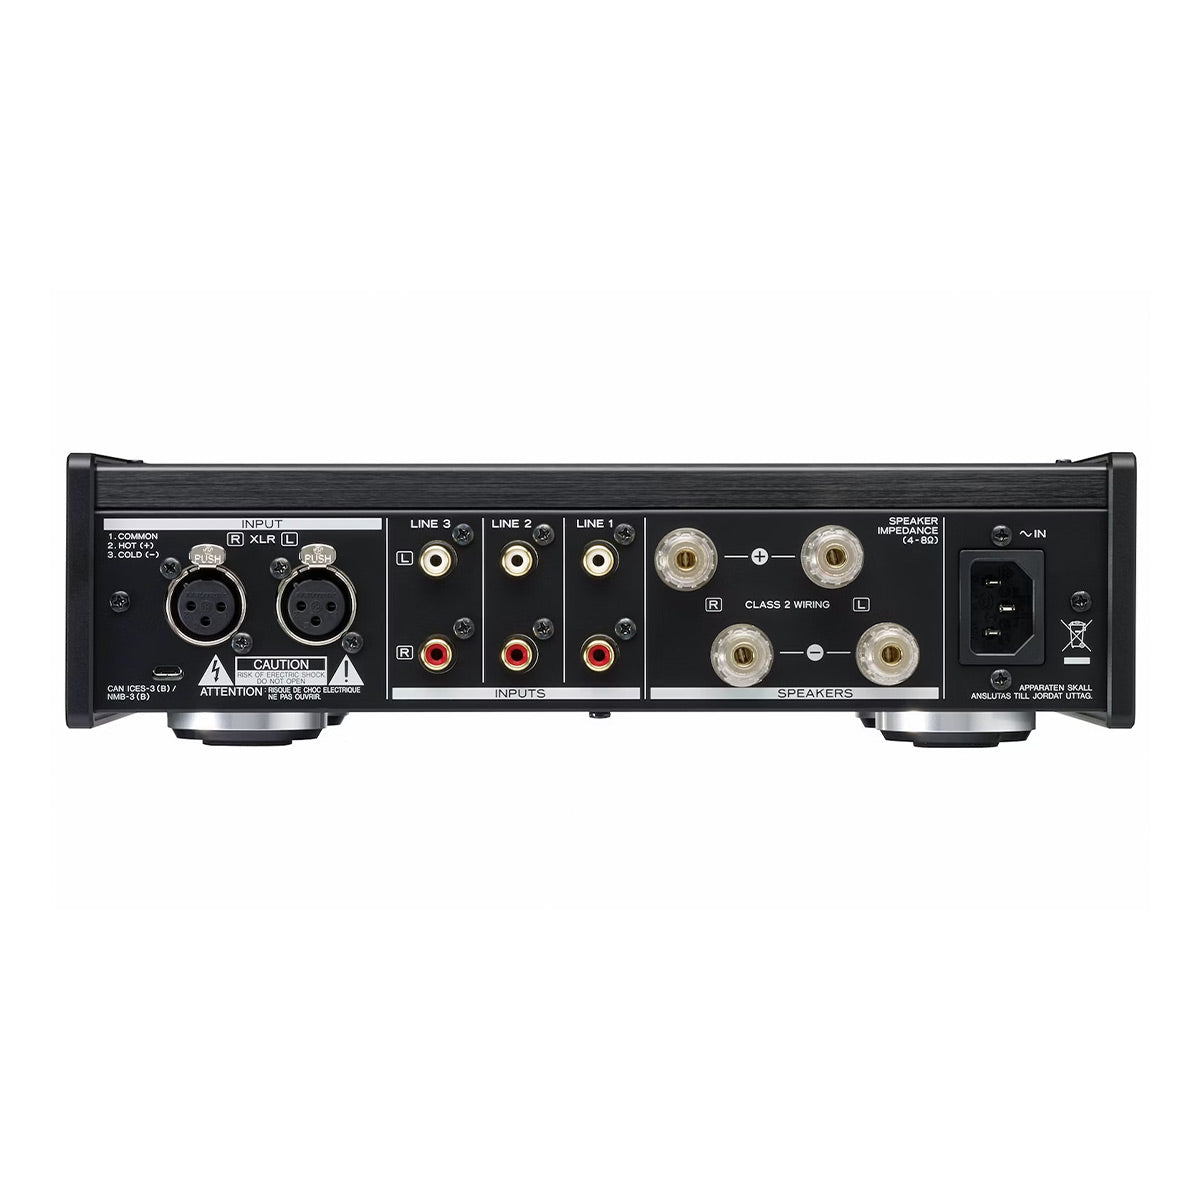 TEAC AX-505B Stereo Integrated Amplifier with Balanced Input Capability